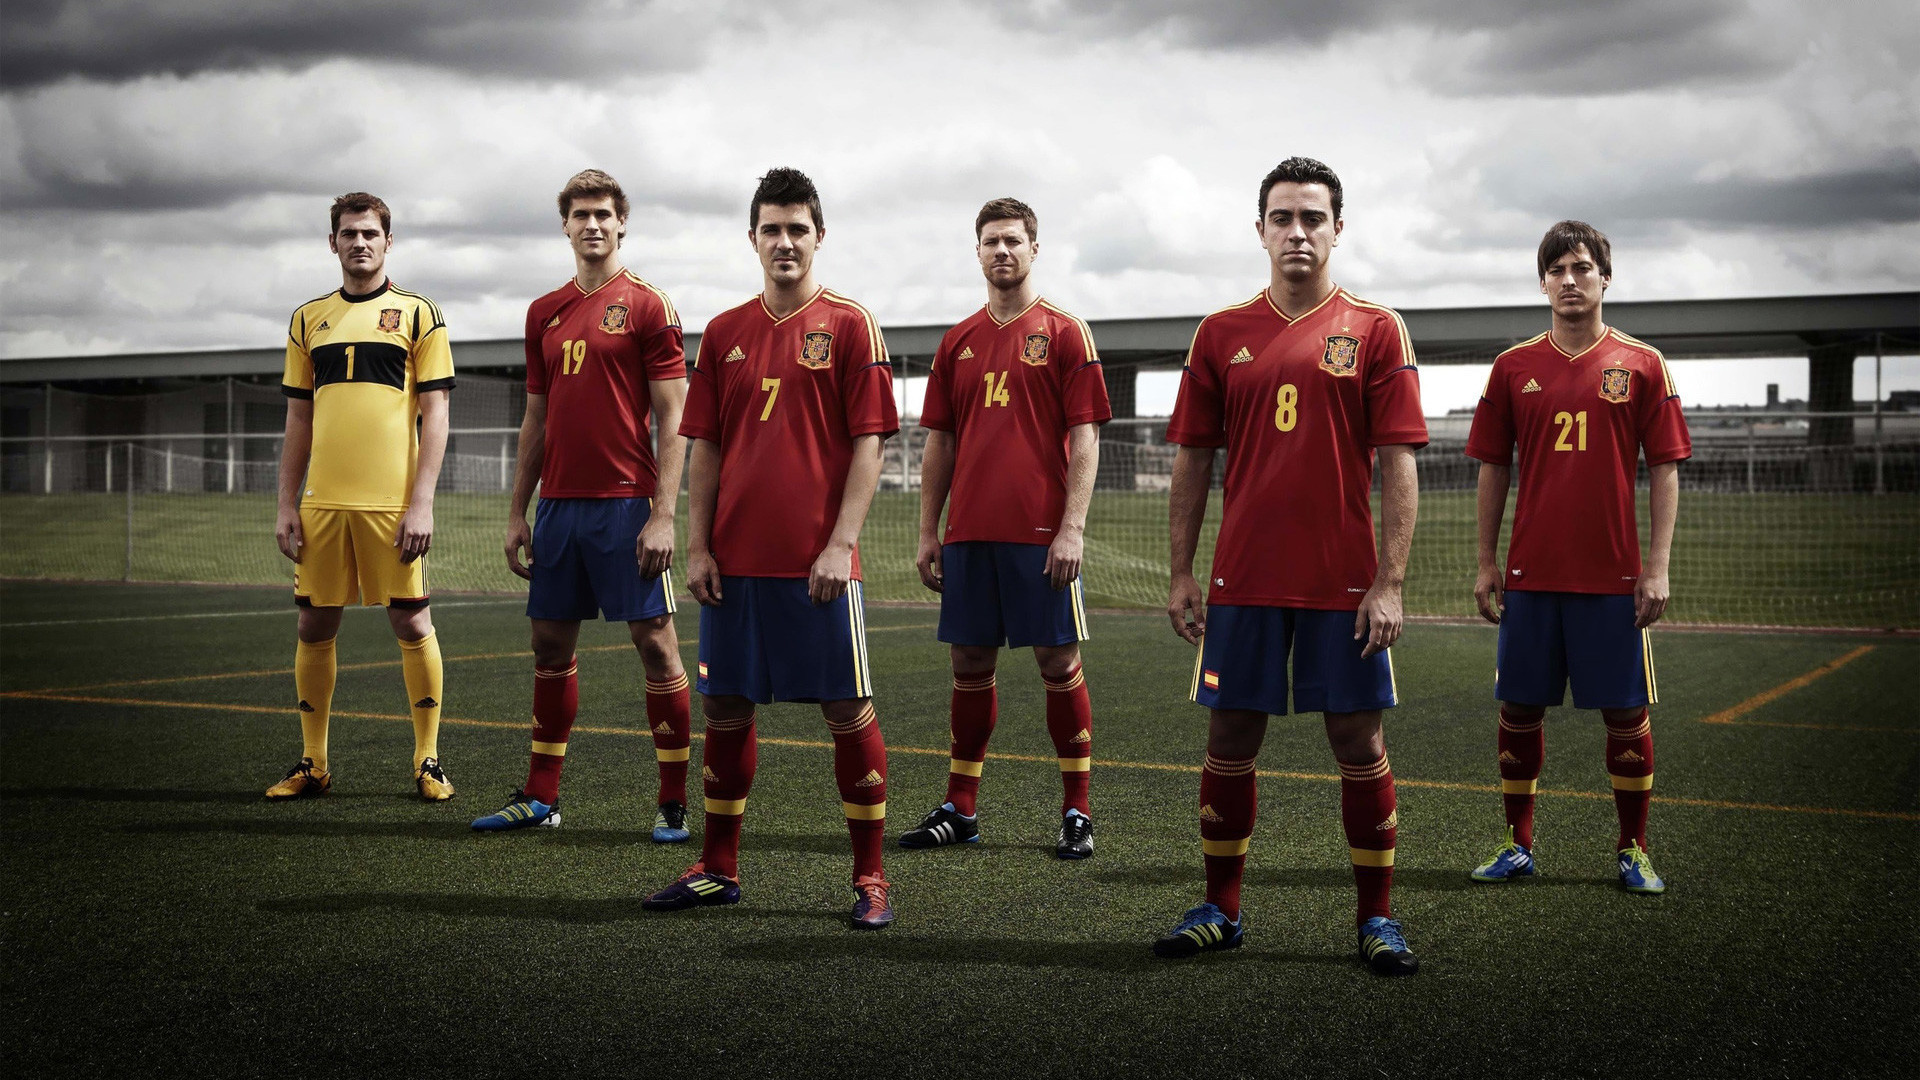 1920x1080  Spain Football Wallpaper | Images Wallpapers | Pinterest | Spain  football and Wallpaper